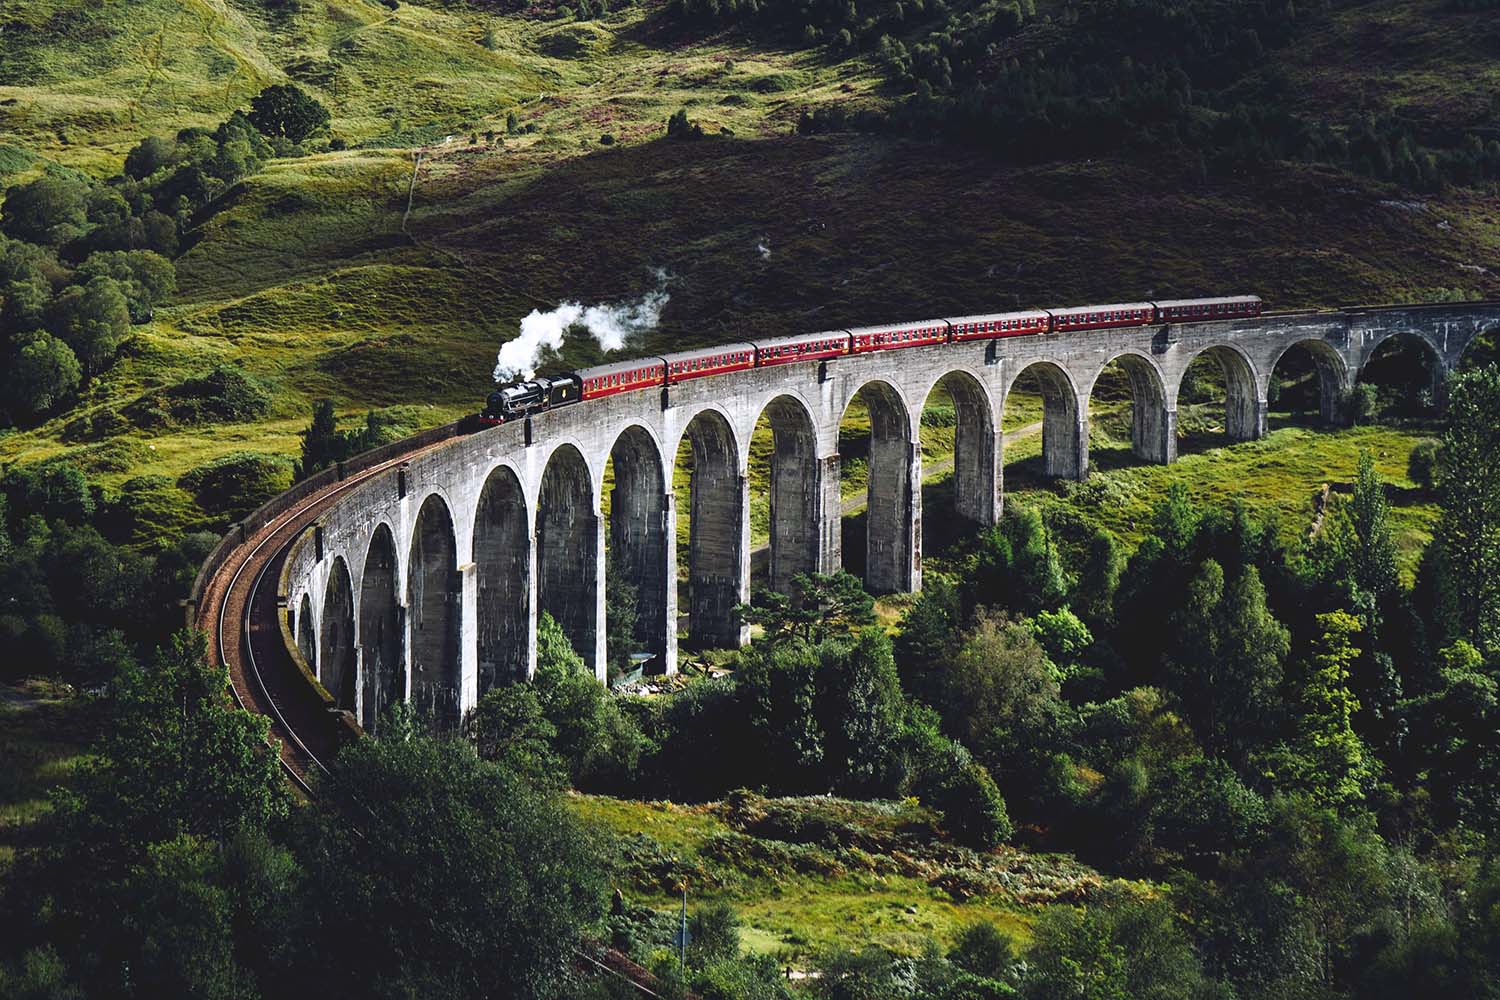 Jacobite Express on the Glenfinnan Viaduct